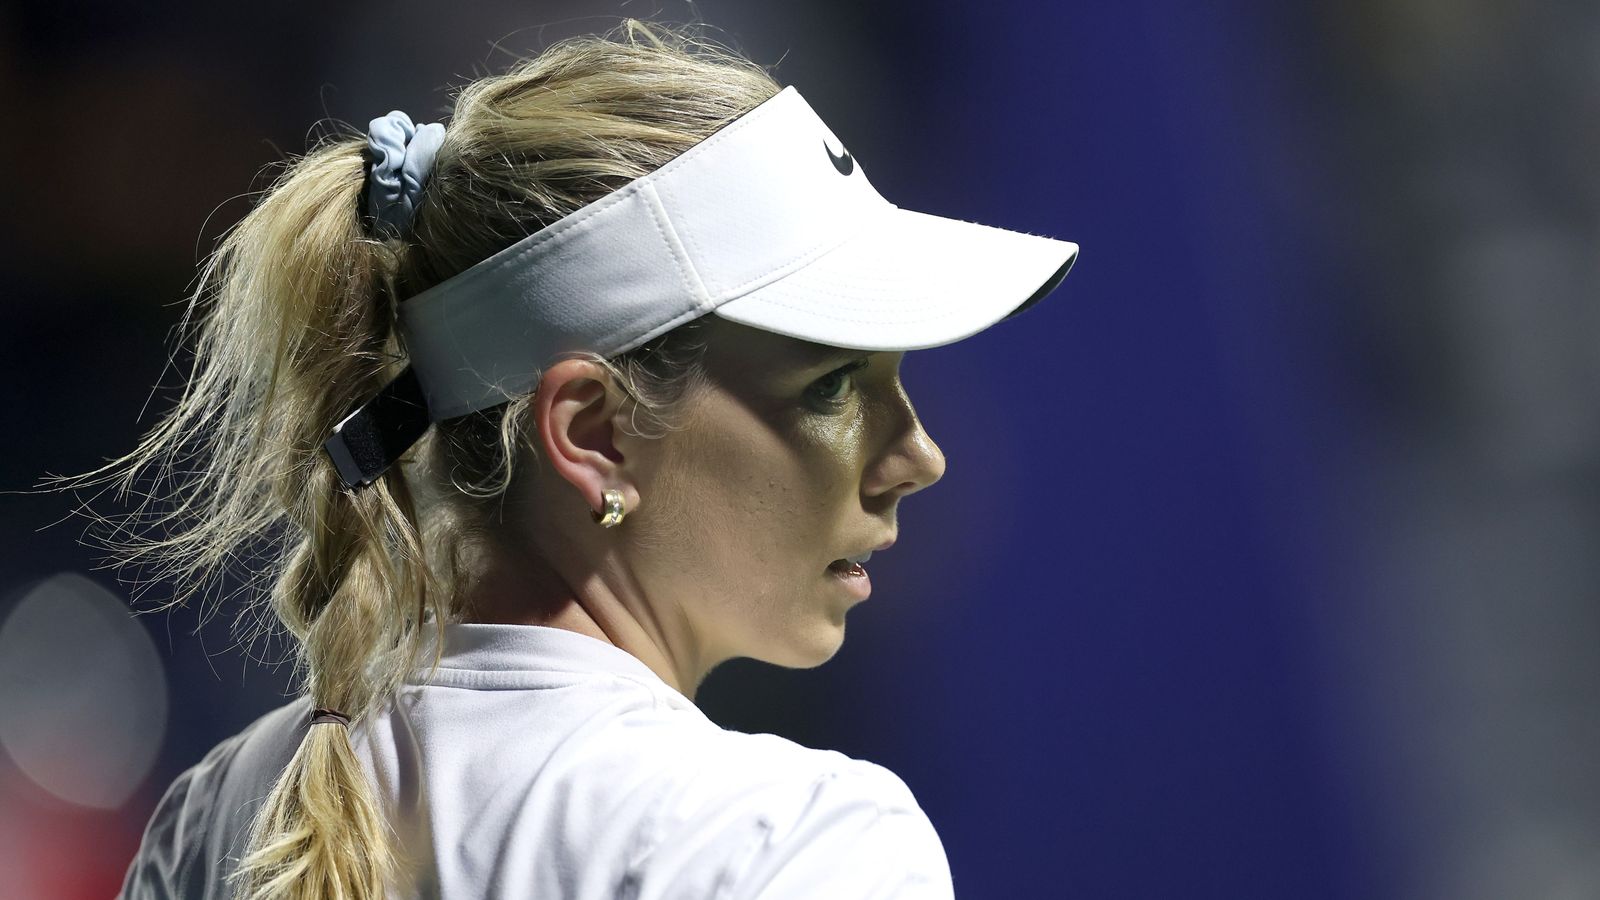 BNP Paribas Open: Katie Boulter suffers Indian Wells first-round defeat to Camila Giorgi 6-3 6-2